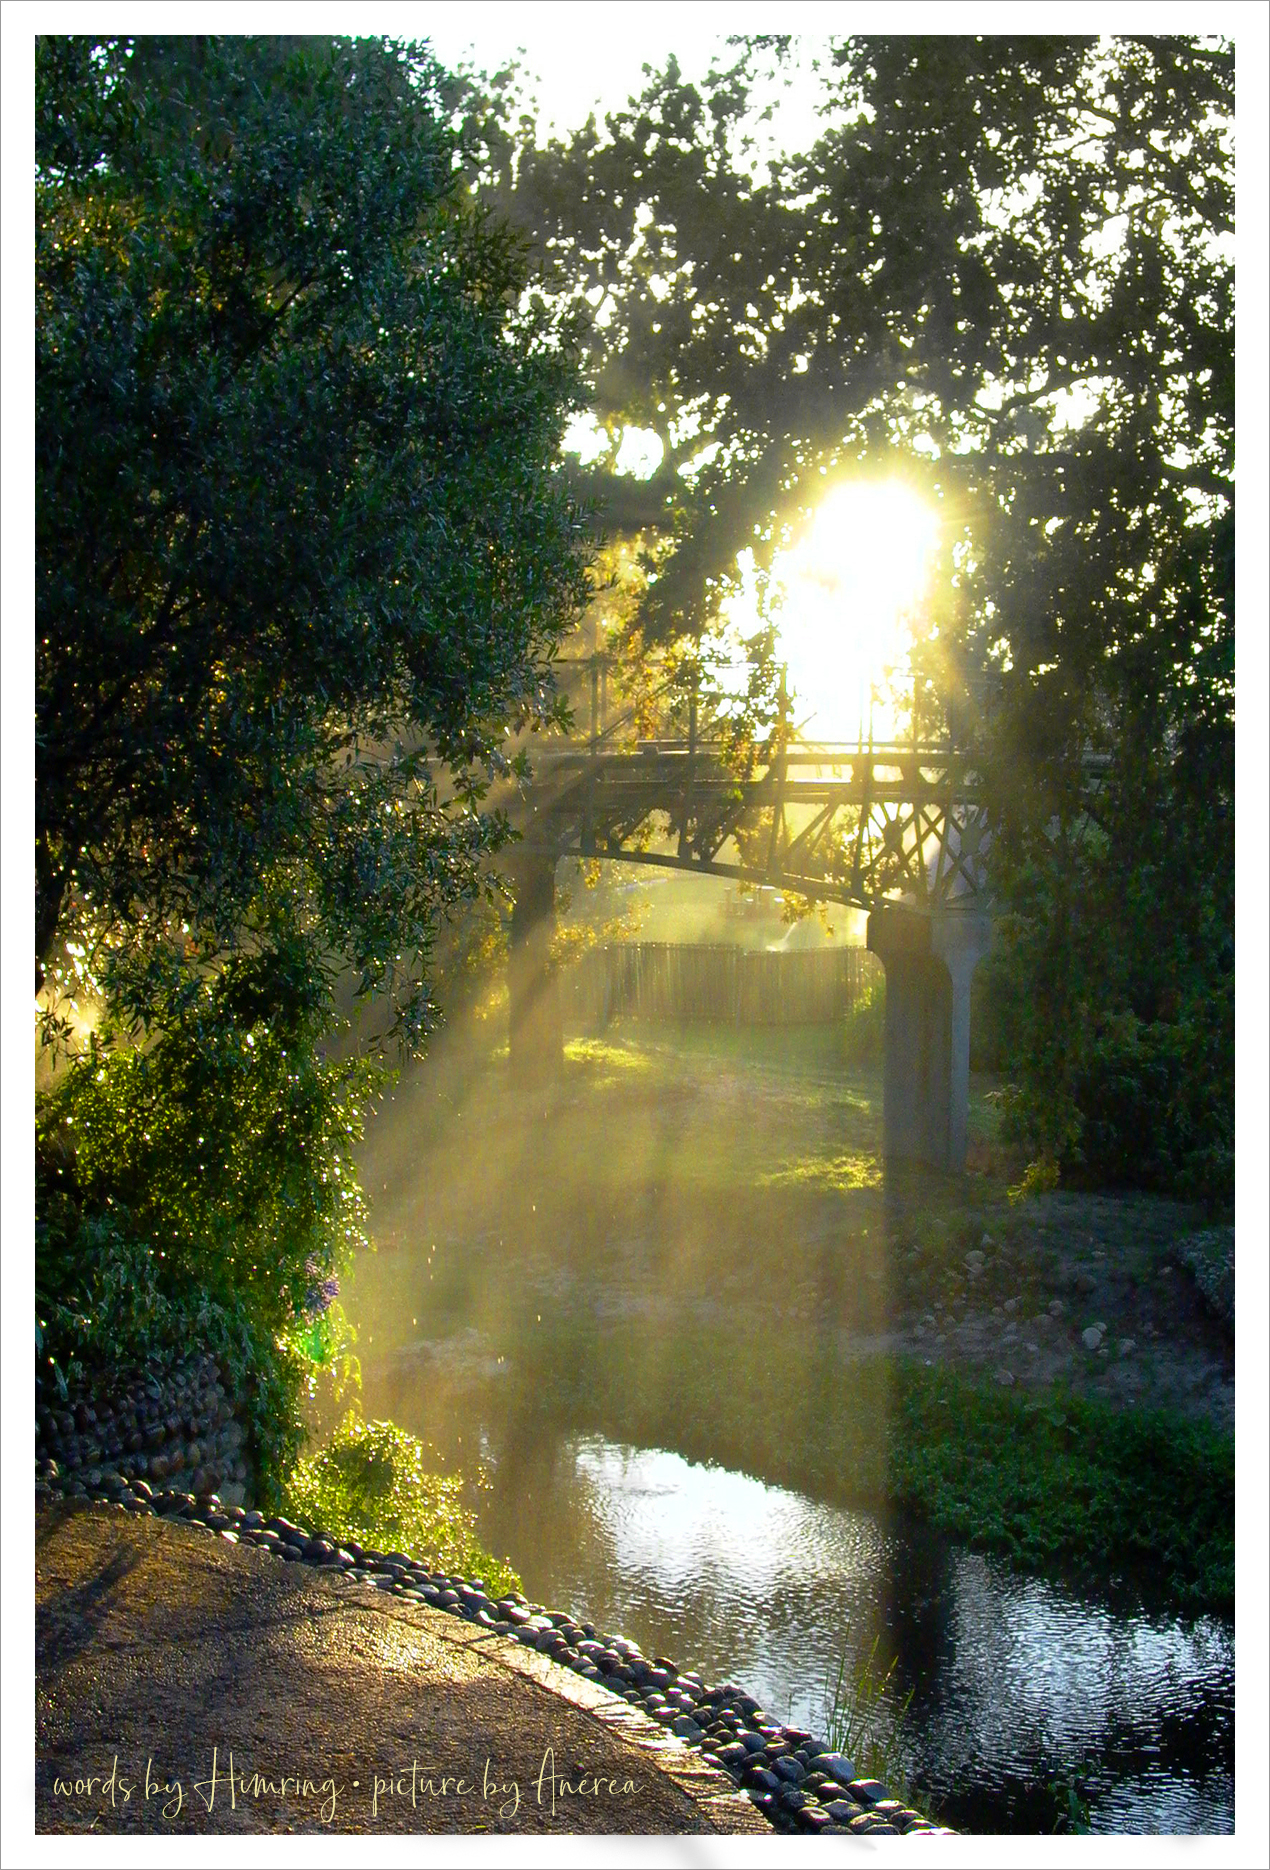 The sun shines through the green leaves of the trees standing over a small river. A bridge can be seen between them.